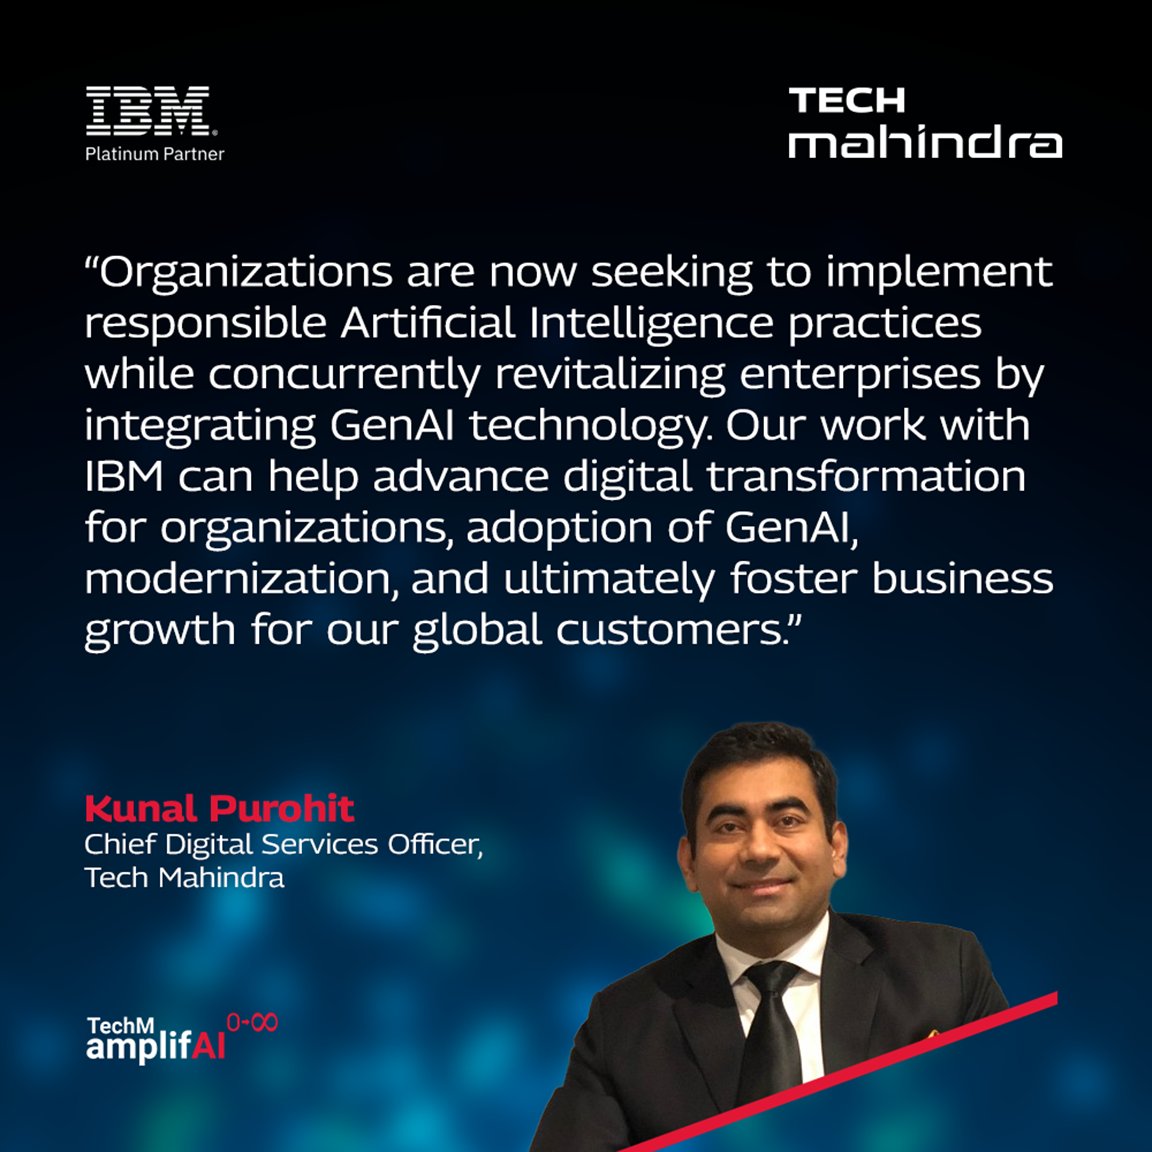 We're delighted to share that @Tech_Mahindra and @IBM have partnered to help enterprises accelerate the adoption of trustworthy #GenerativeAI using Watsonx. Know more about this strategic #partnership: techmahindra.com/en-in/techm-an… #ScaleAtSpeed #IBM #Watsonx #DigitalTransfrmation